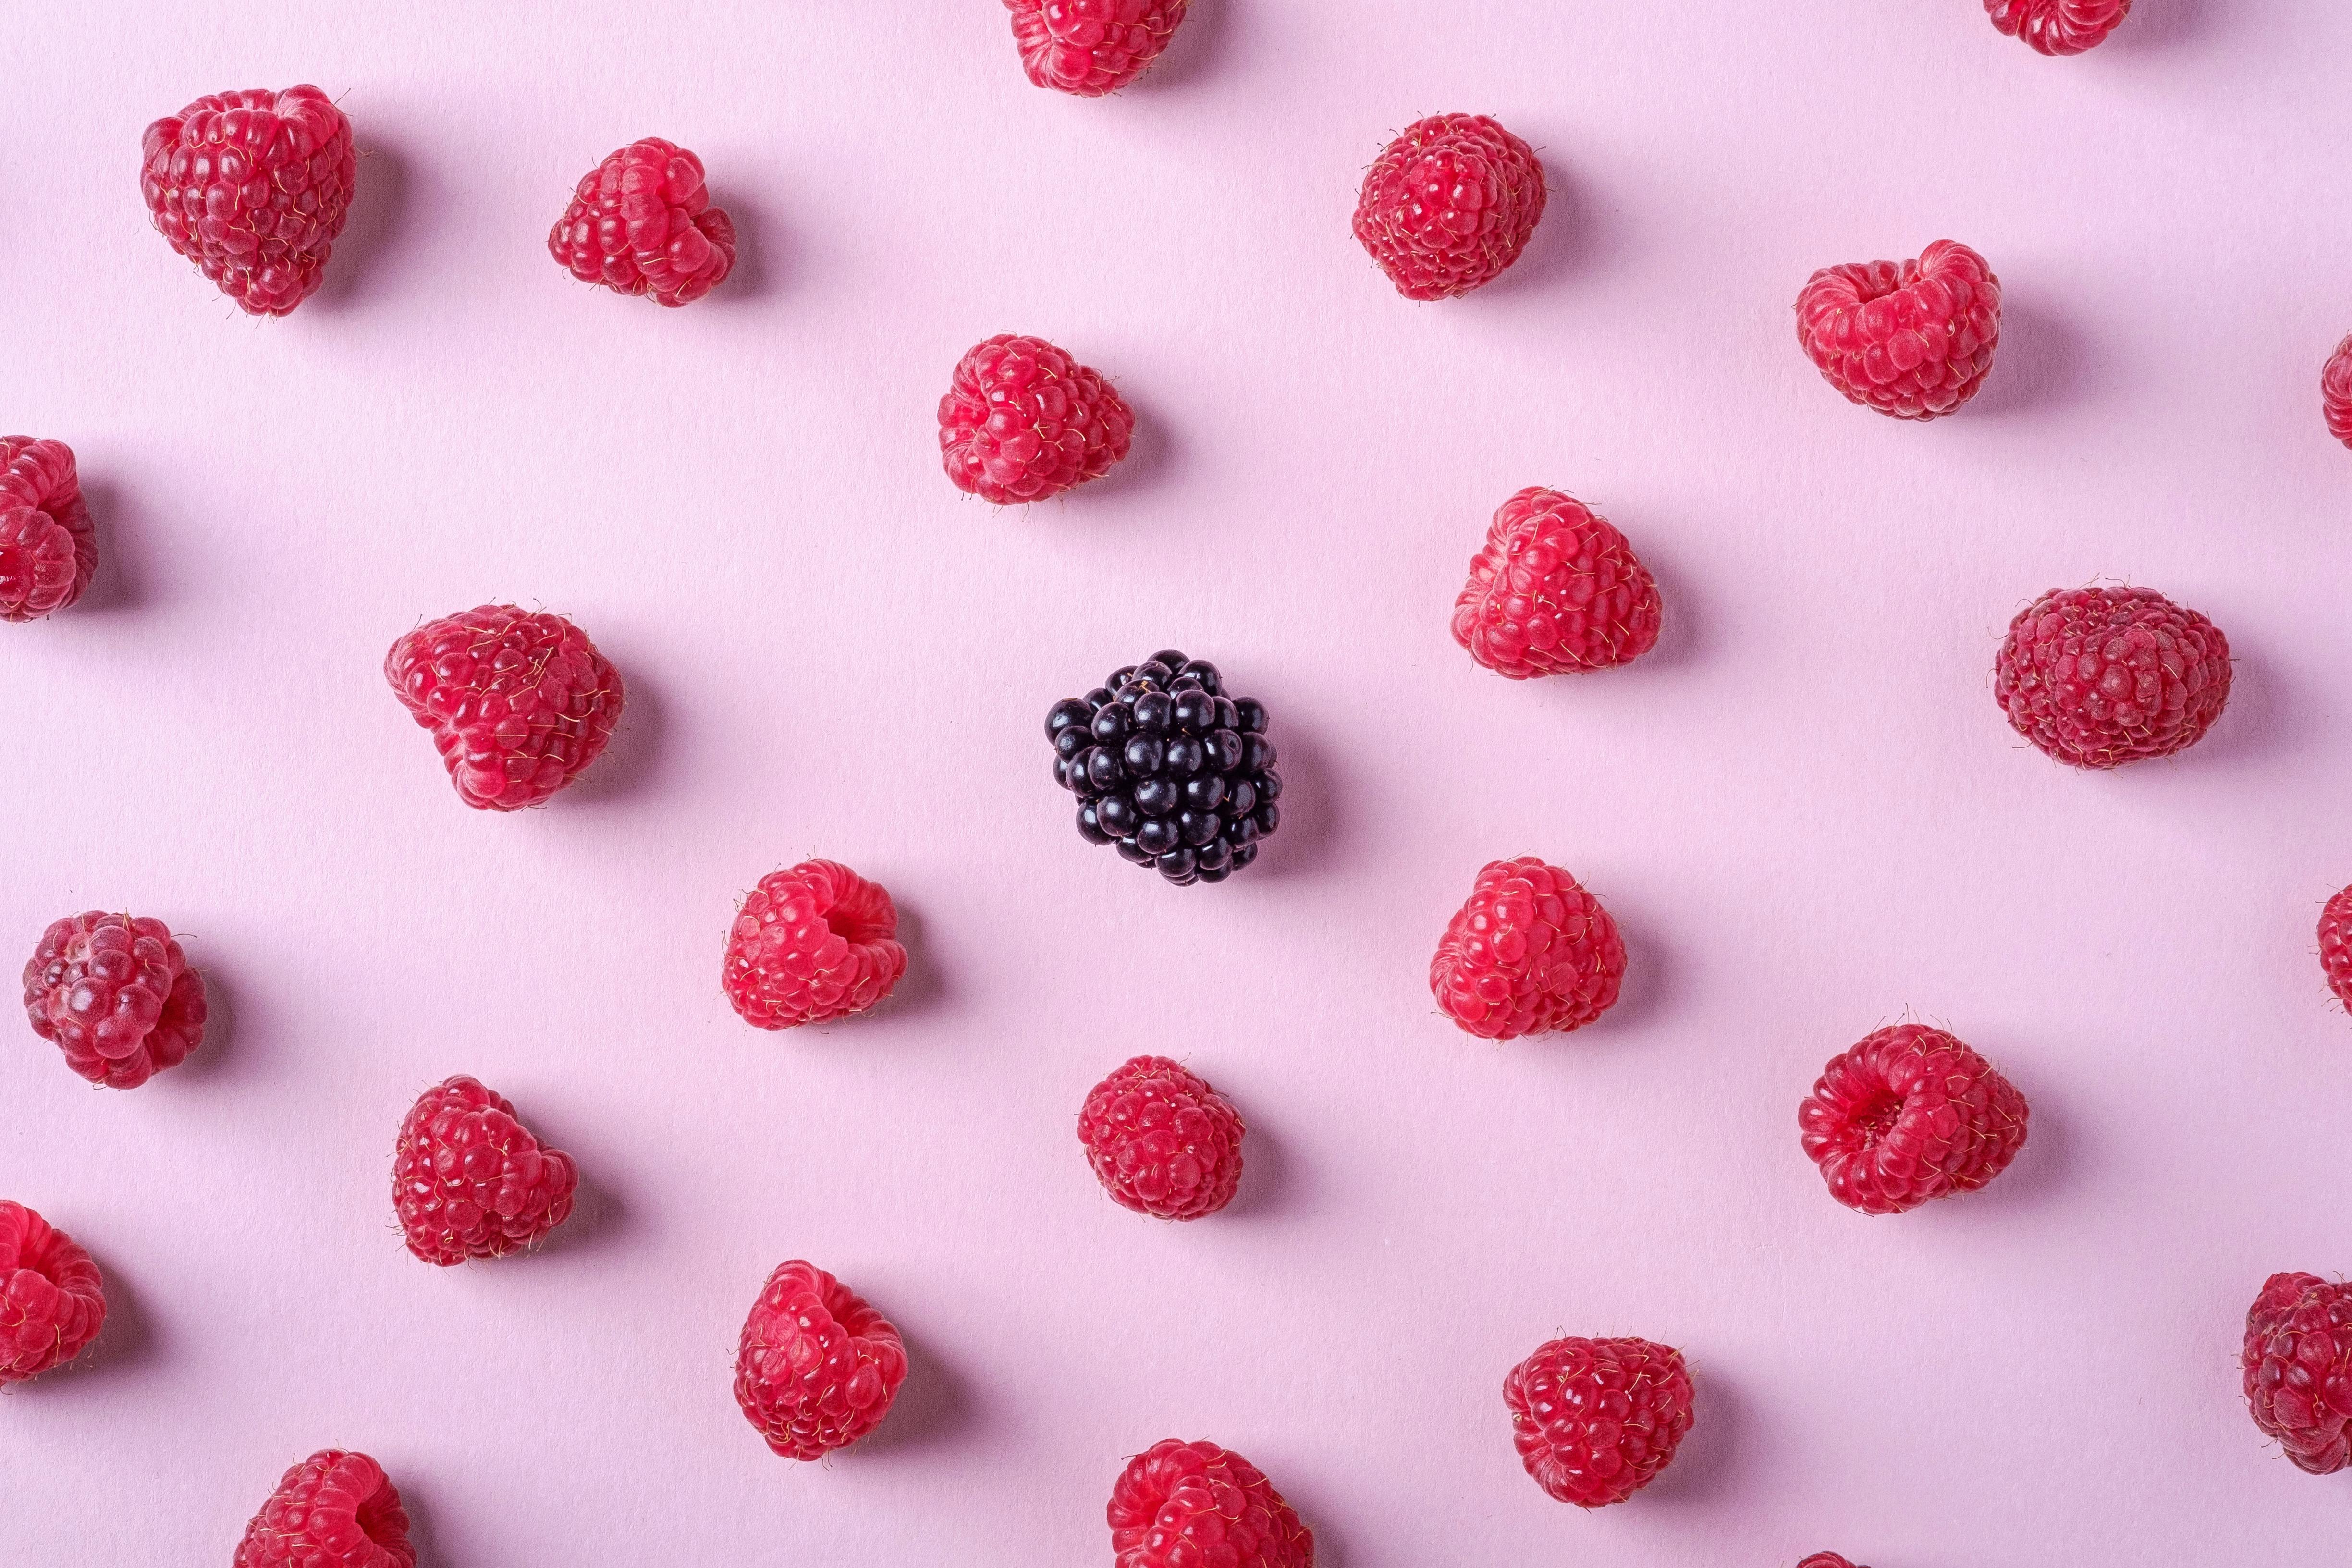 Photo Of Raspberries And Blackberry On Pink Background · Free Stock Photo